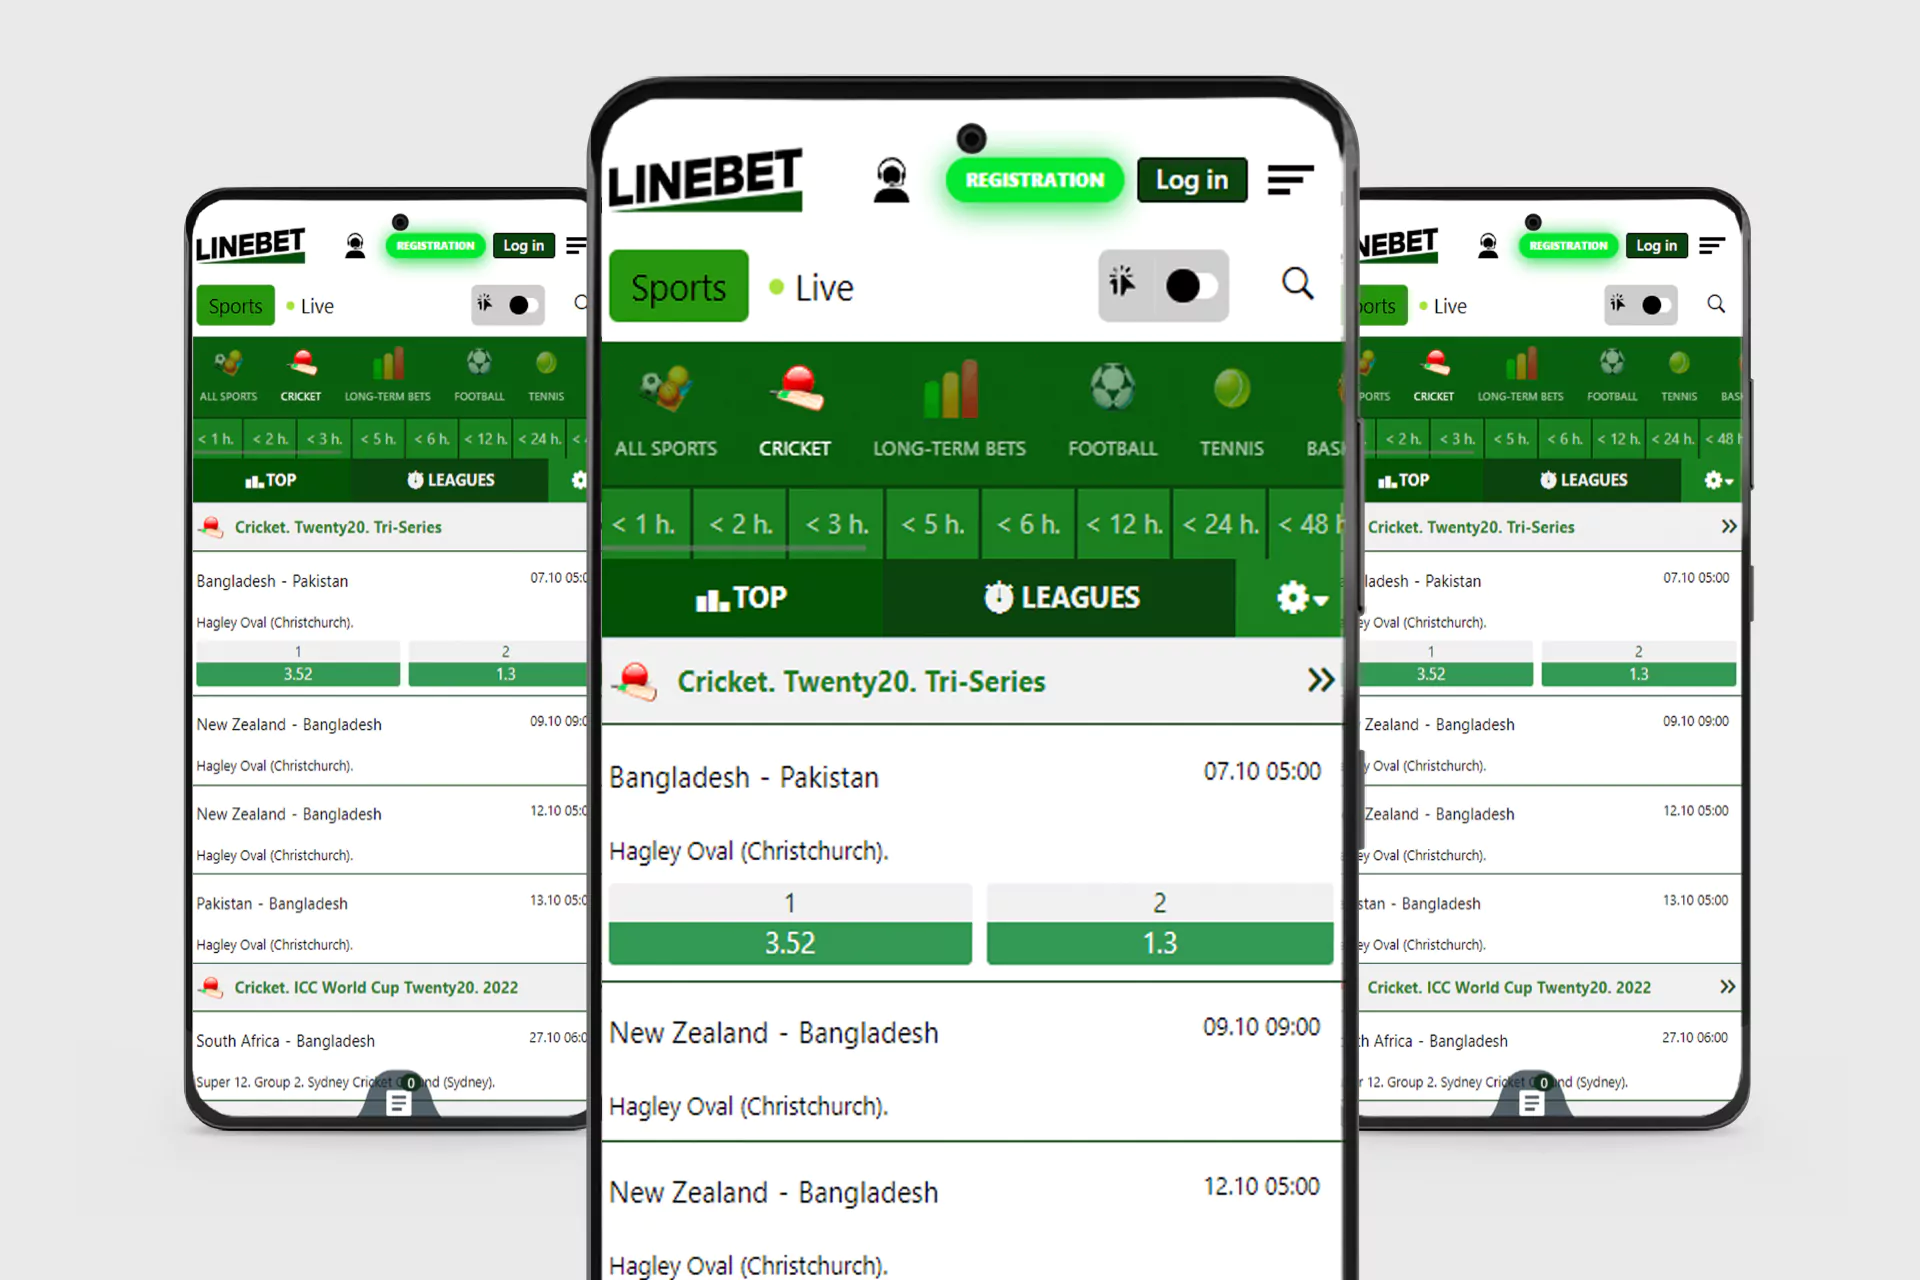 You can free download the Linebet app for Android and iOS.